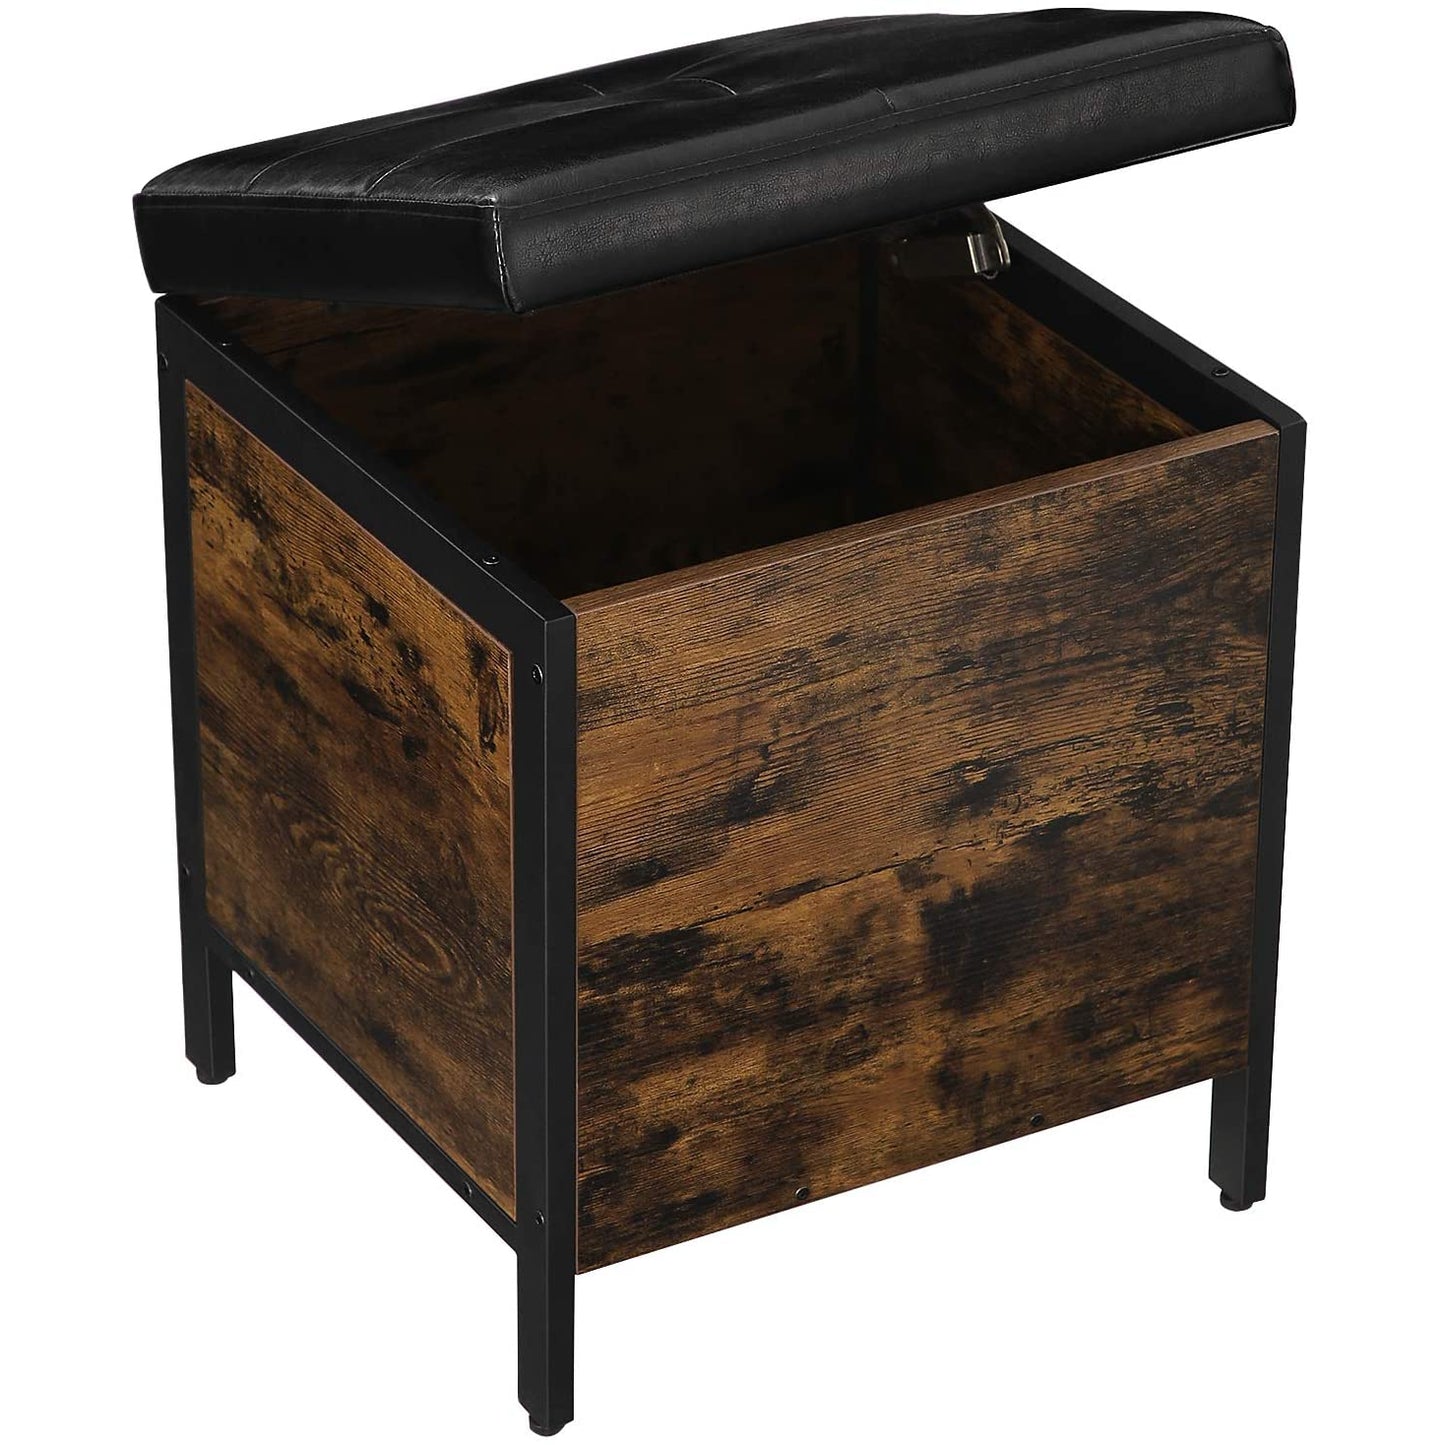 Nancy's Wenatchee Hocker - Stool with storage space - Shoe bench - Footstools - Faux leather and Wood - Industrial - Brown/Black - 40 x 40 x 50 cm 